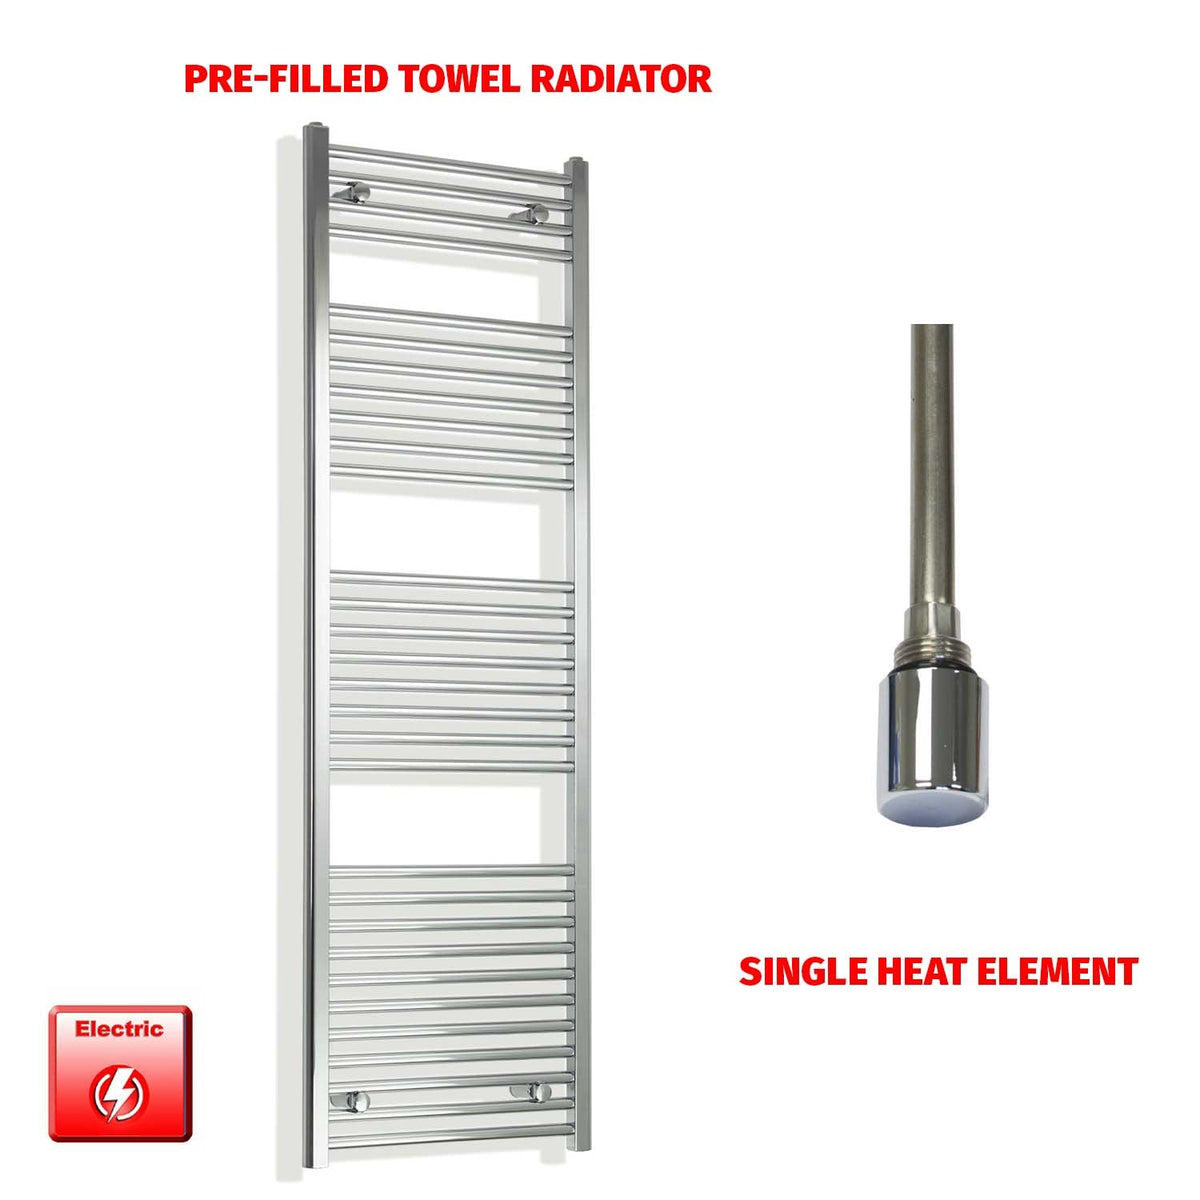 1700mm High 550mm Wide Pre-Filled Electric Heated Towel Radiator Chrome HTR Single Element No Timer